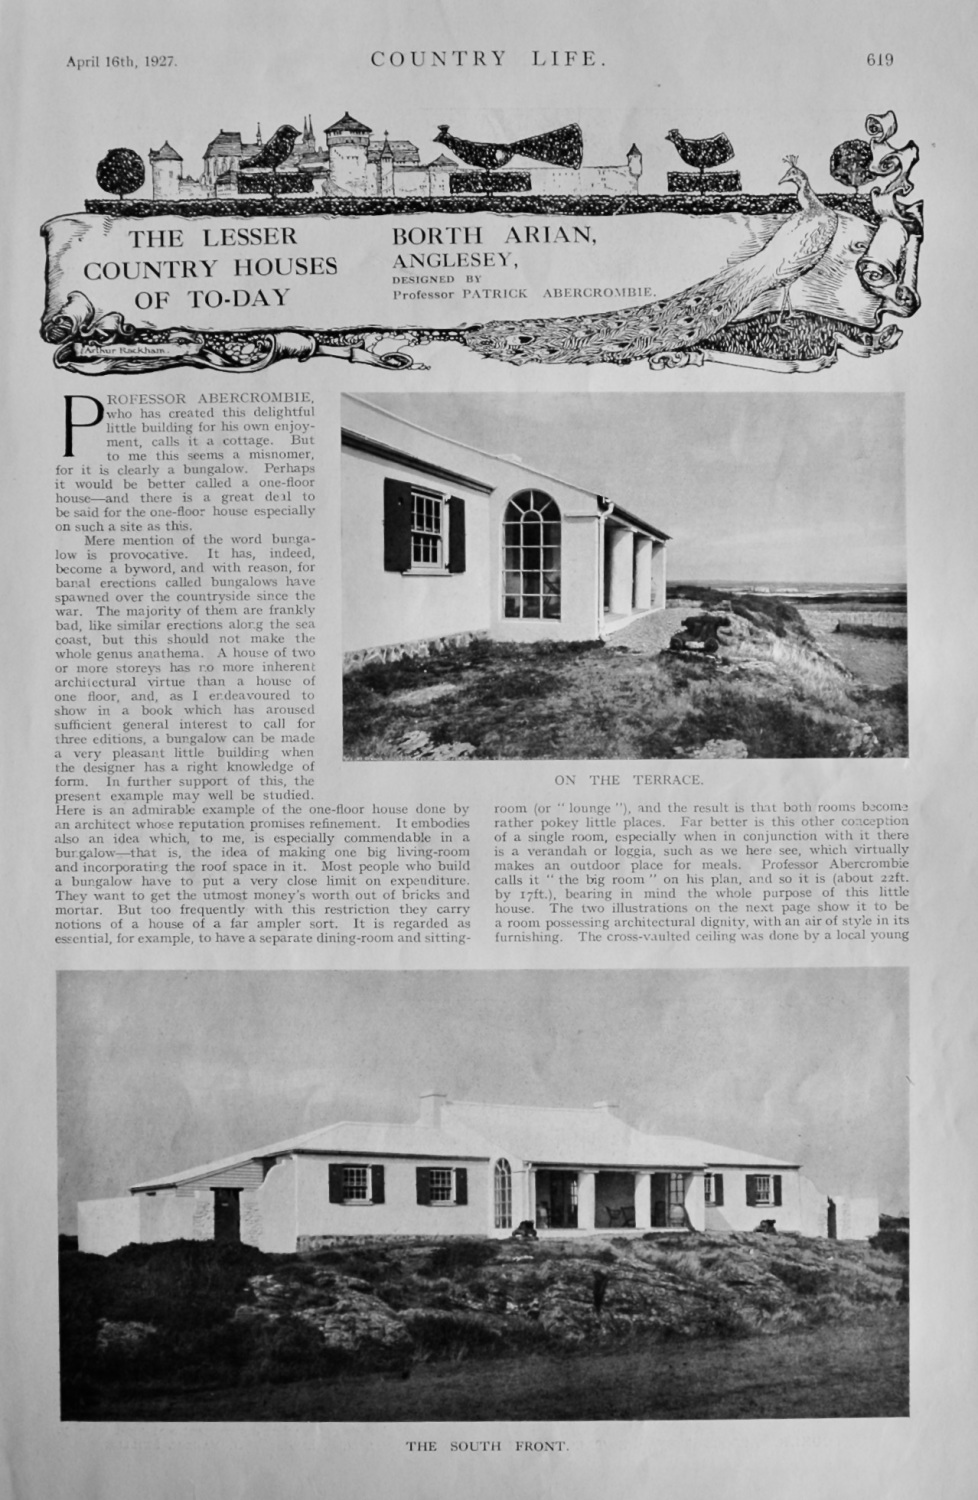 Borth Arian, Anglesey,  Designed by Professor Patrick Abercrombie.  1927.